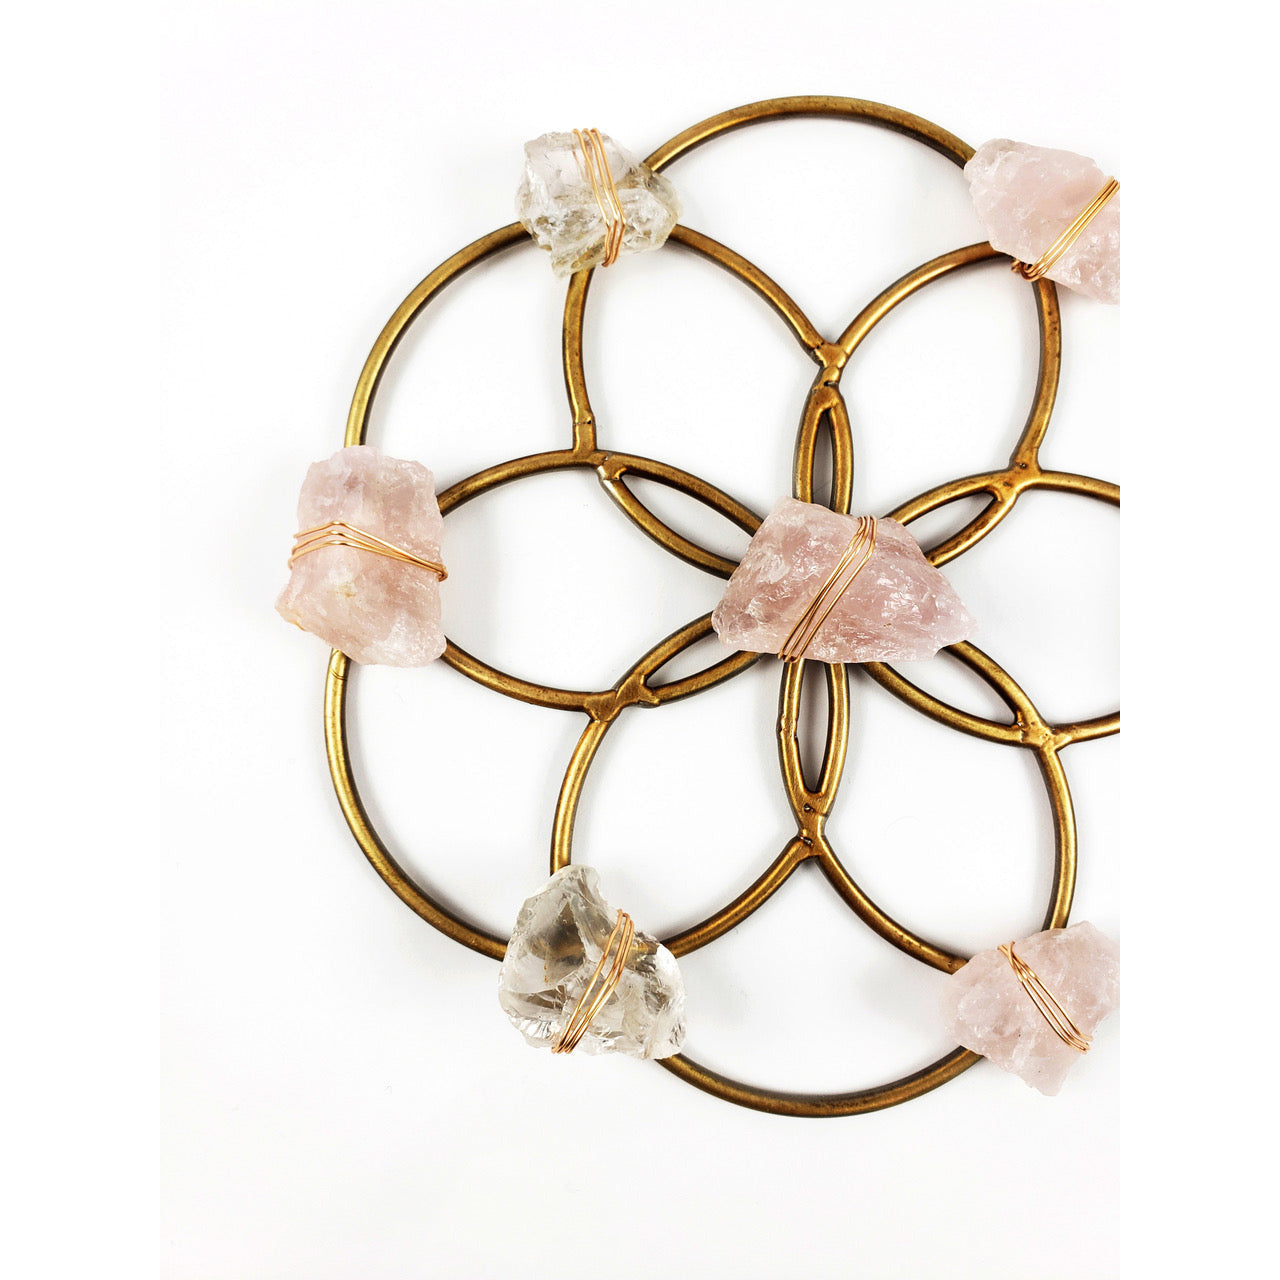 Small Flower of Life Crystal Grid - Rose Quartz and Quartz by Ariana Ost